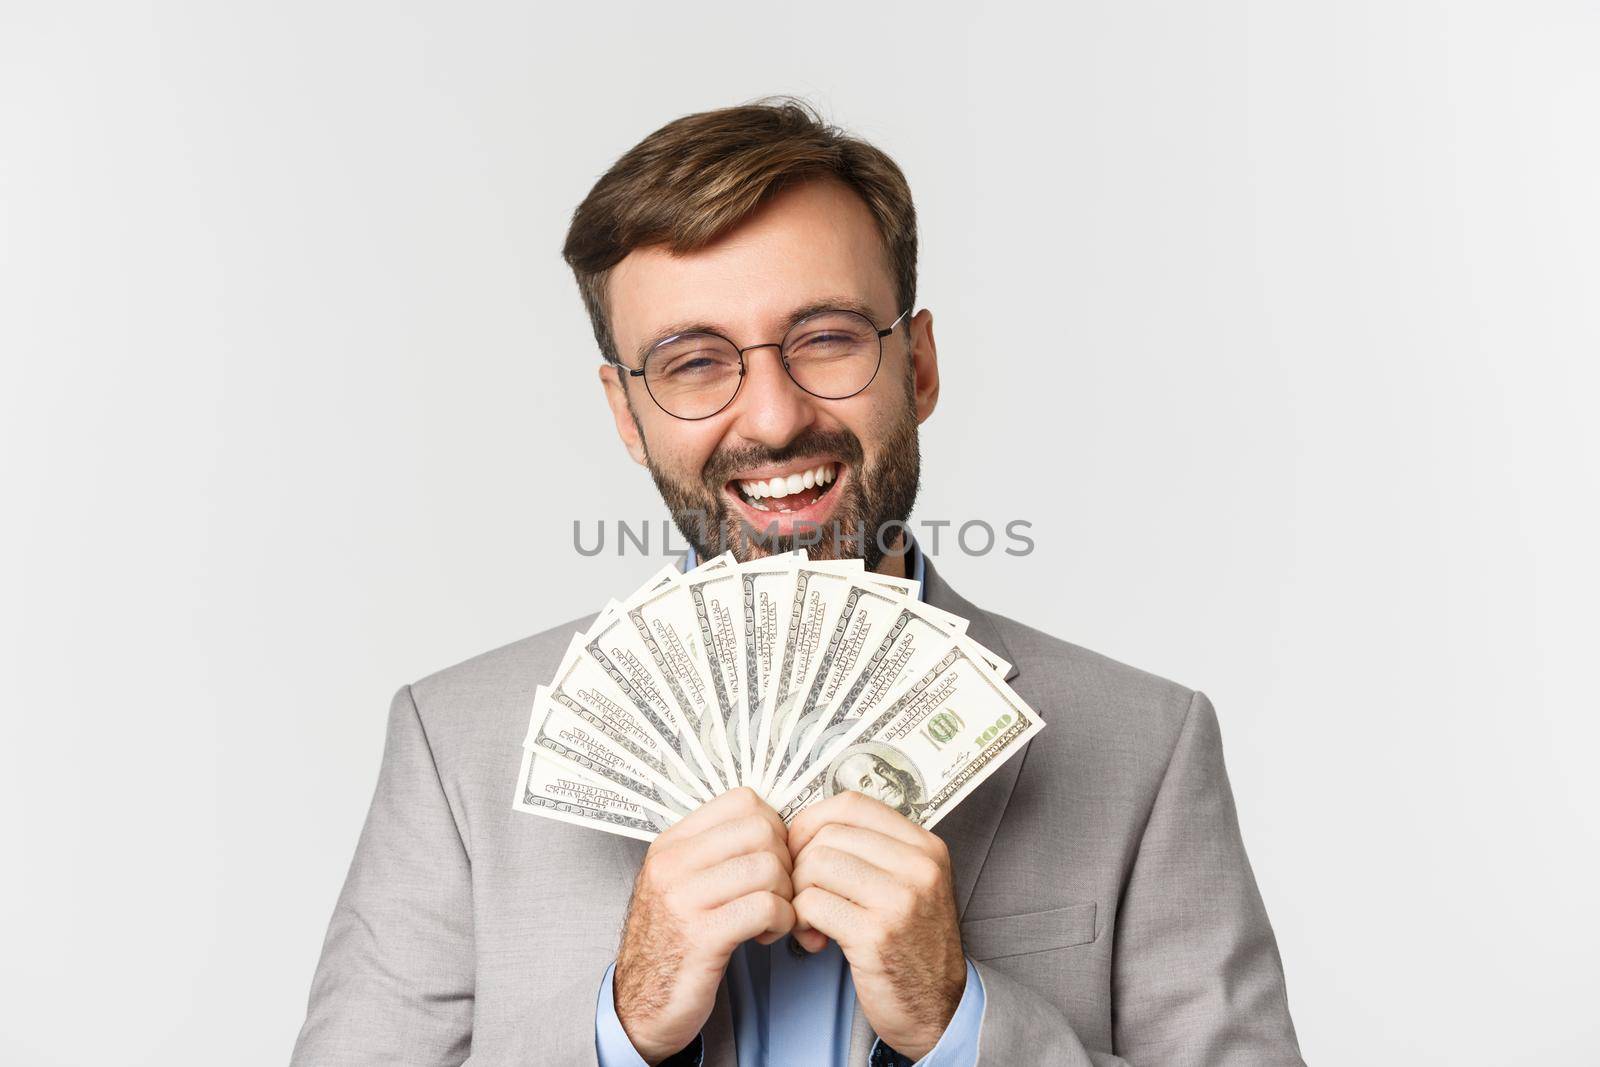 Close-up of rich and successful businessman, wearing gray suit and glasses, showing cash and laughing accomplished, standing over white background.